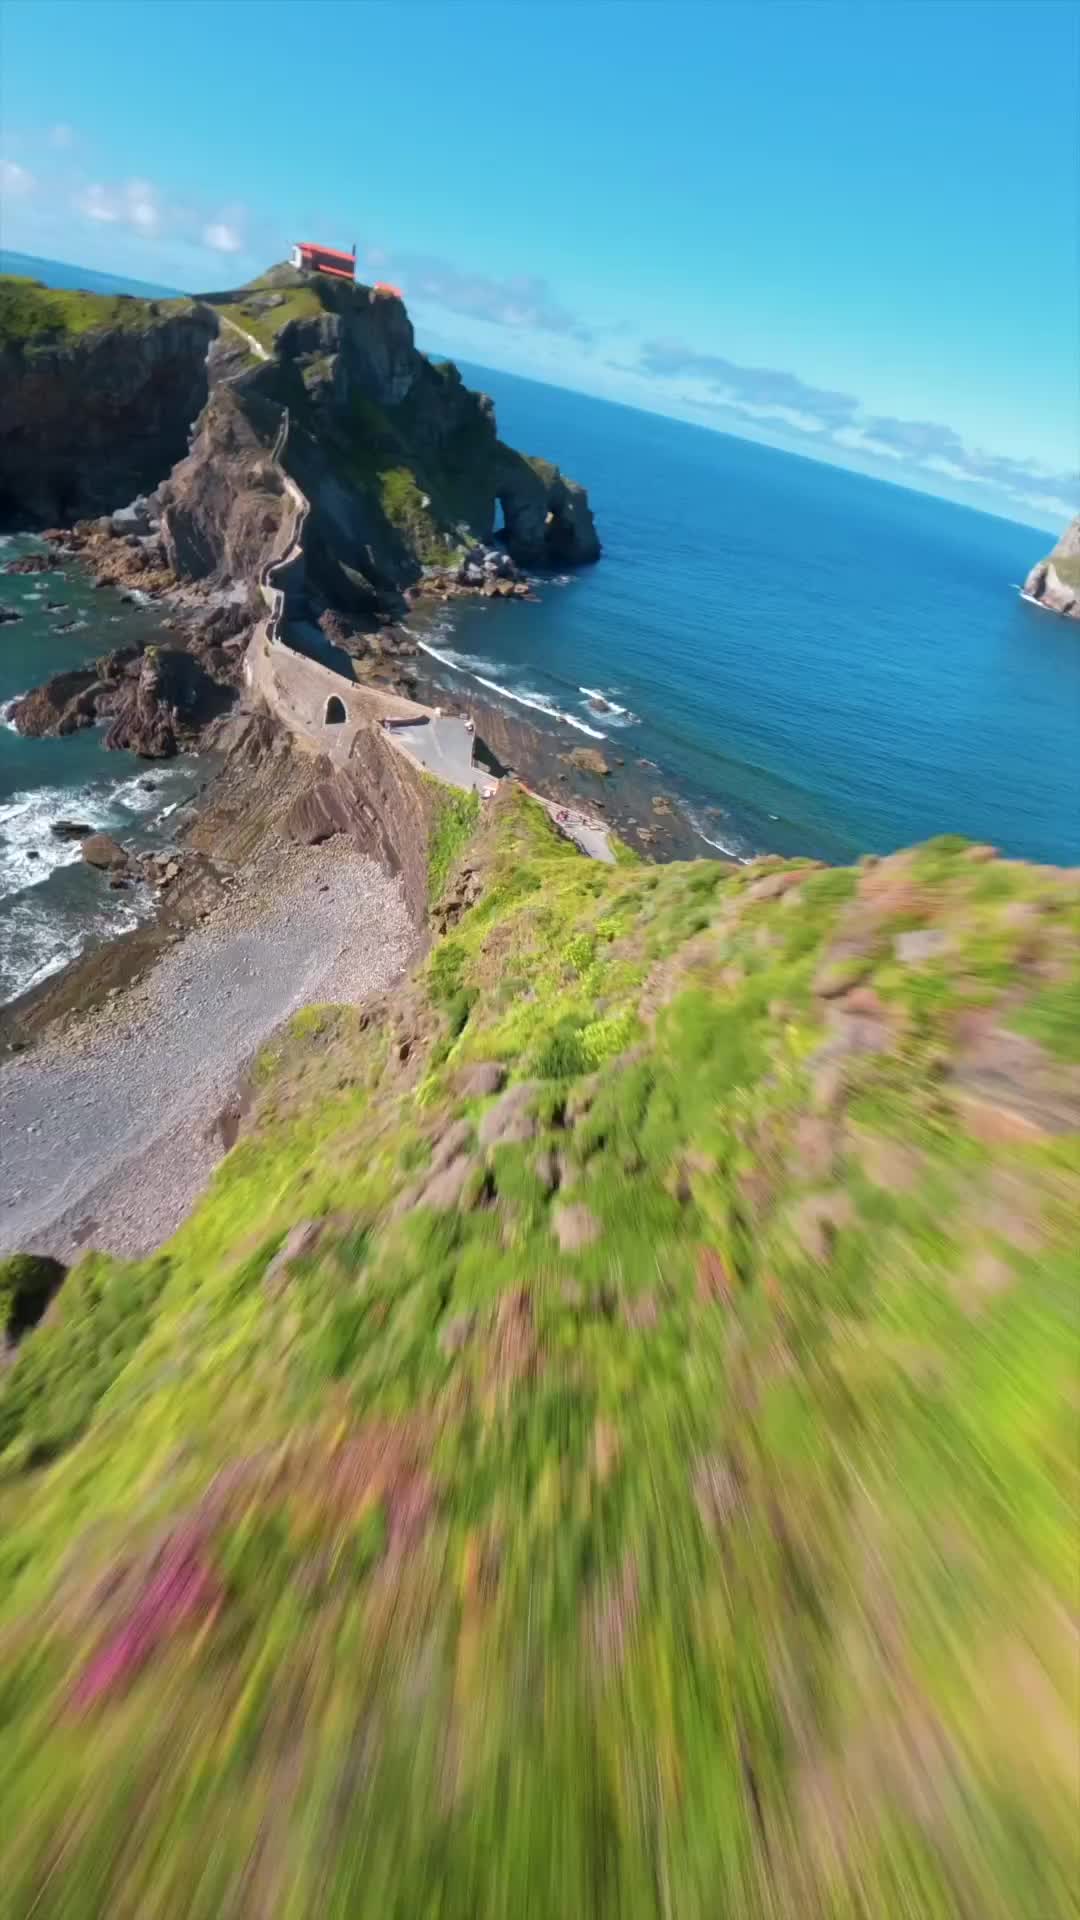 FPV Drone Adventure at Game of Thrones' Dragonstone